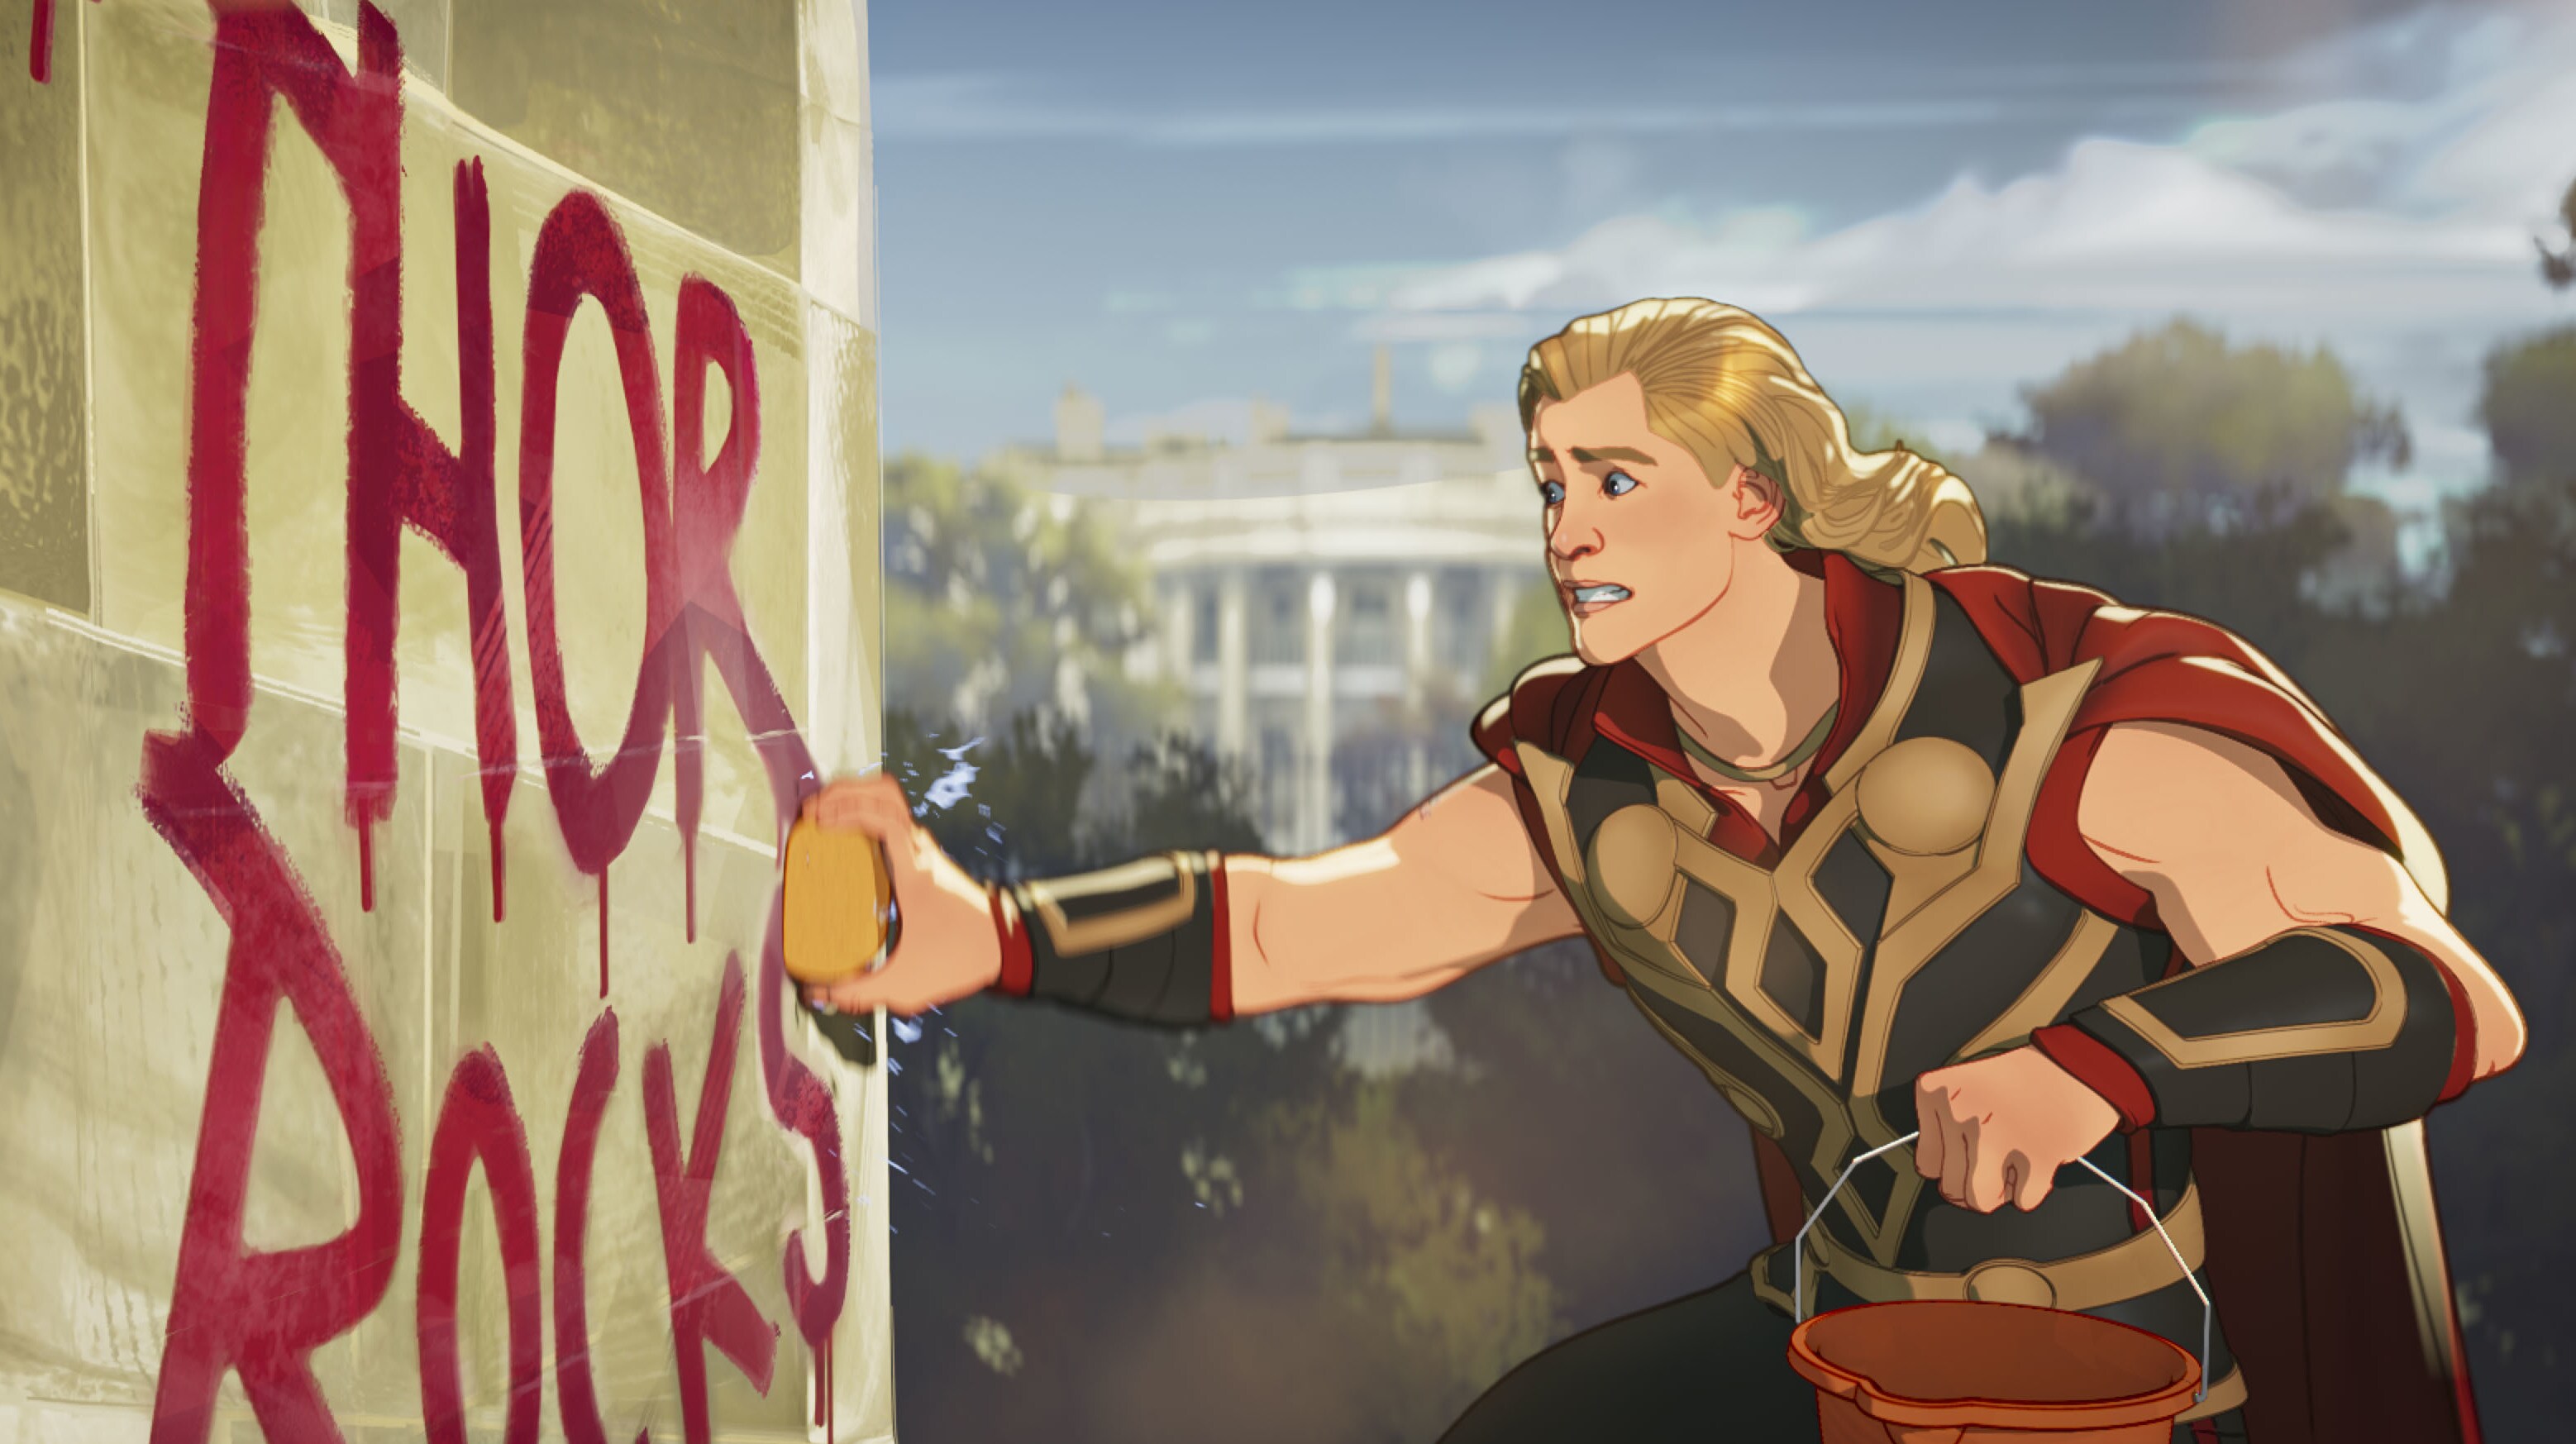 Party Thor in Marvel Studios' WHAT IF…? exclusively on Disney+. ©Marvel Studios 2021. All Rights Reserved.